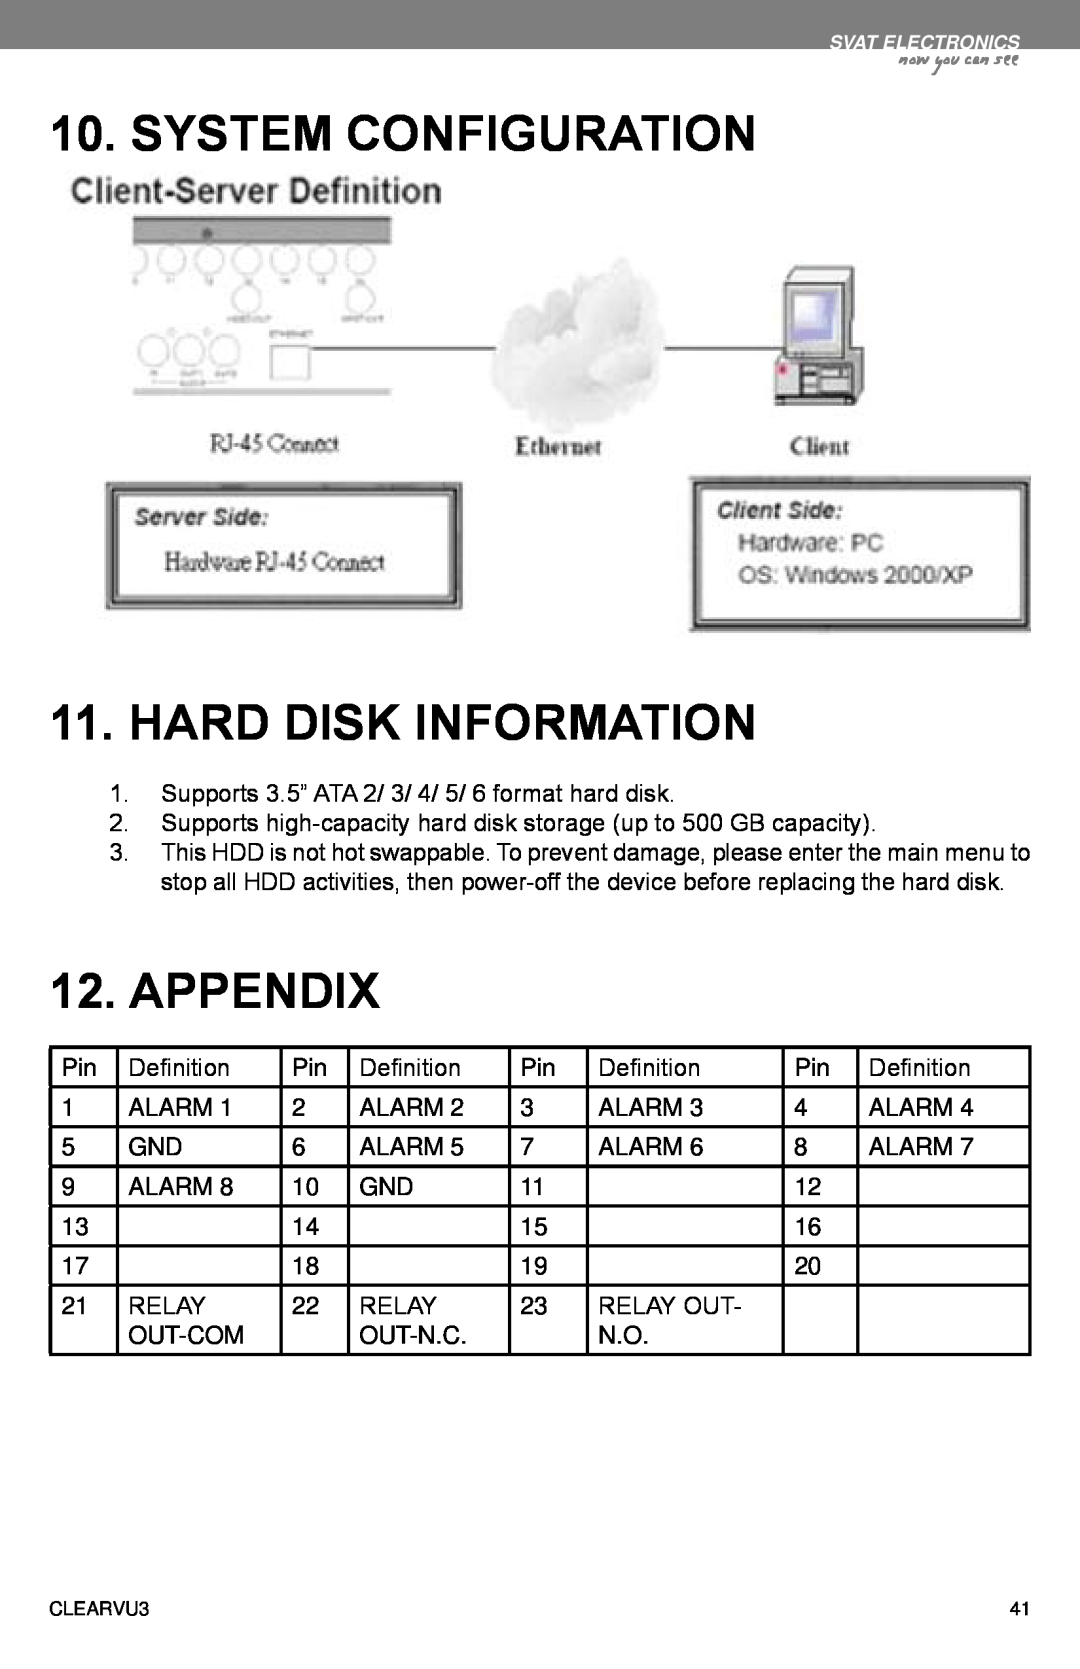 SVAT Electronics CLEARVU3 instruction manual SYSTEM CONFIGURATION 11.HARD DISK INFORMATION, Appendix, now you can see 